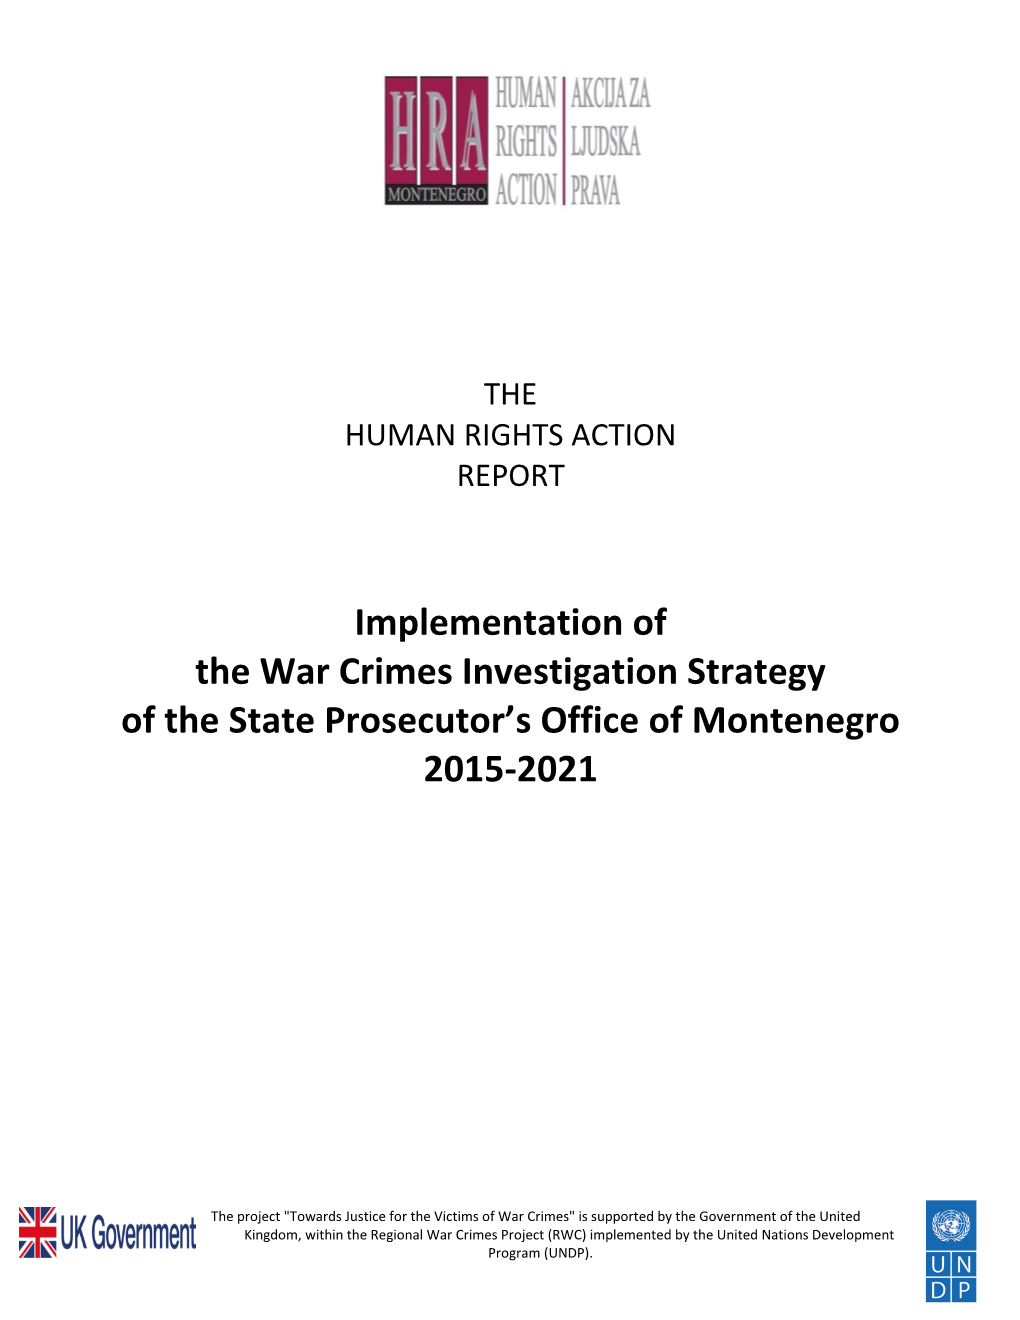 Implementation of the War Crimes Investigation Strategy of the State Prosecutor’S Office of Montenegro 2015-2021